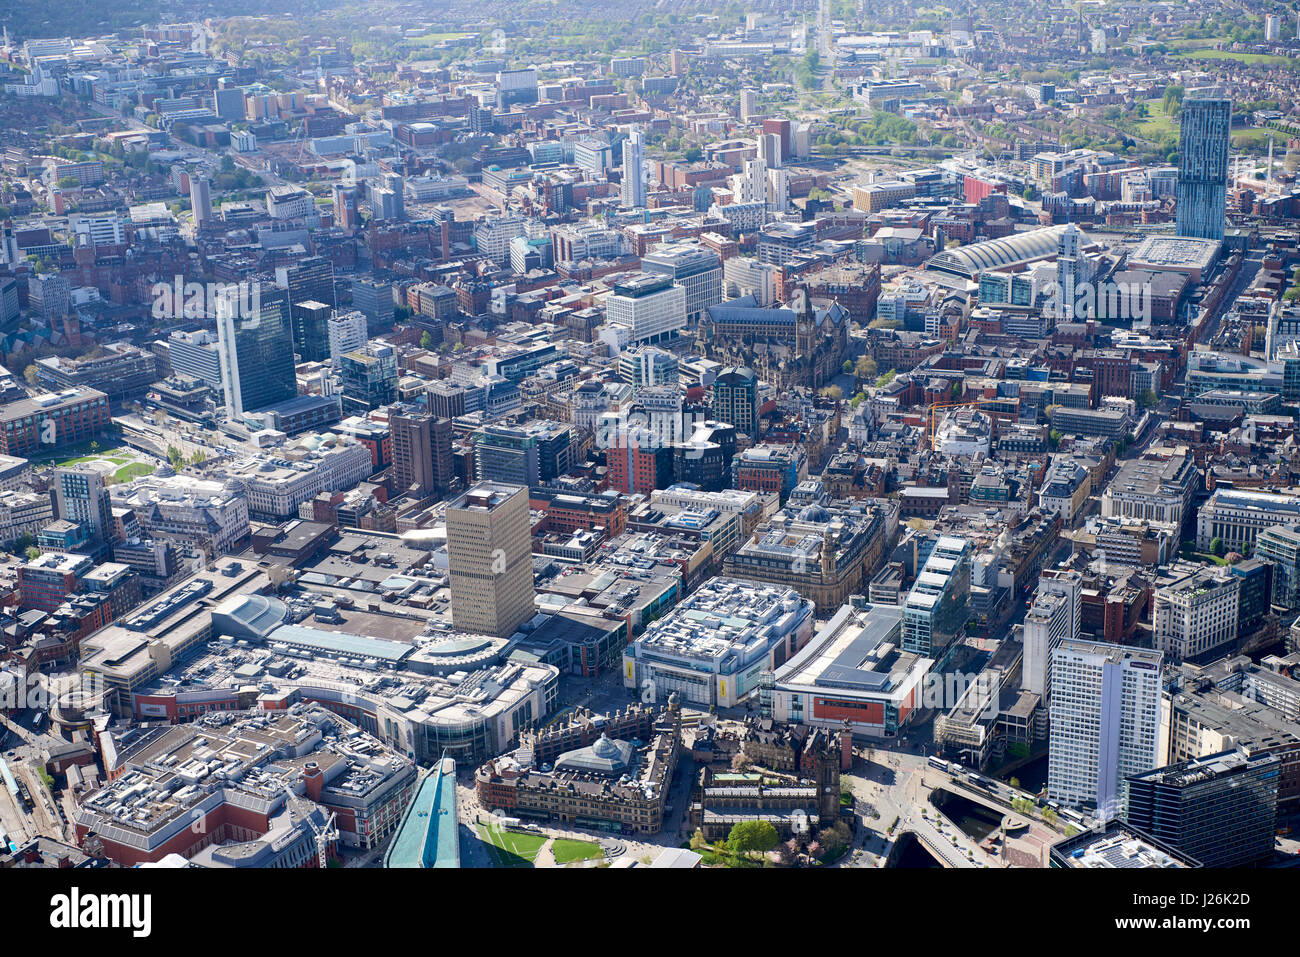 Manchester City centre from the air, North West England, UK Stock Photo